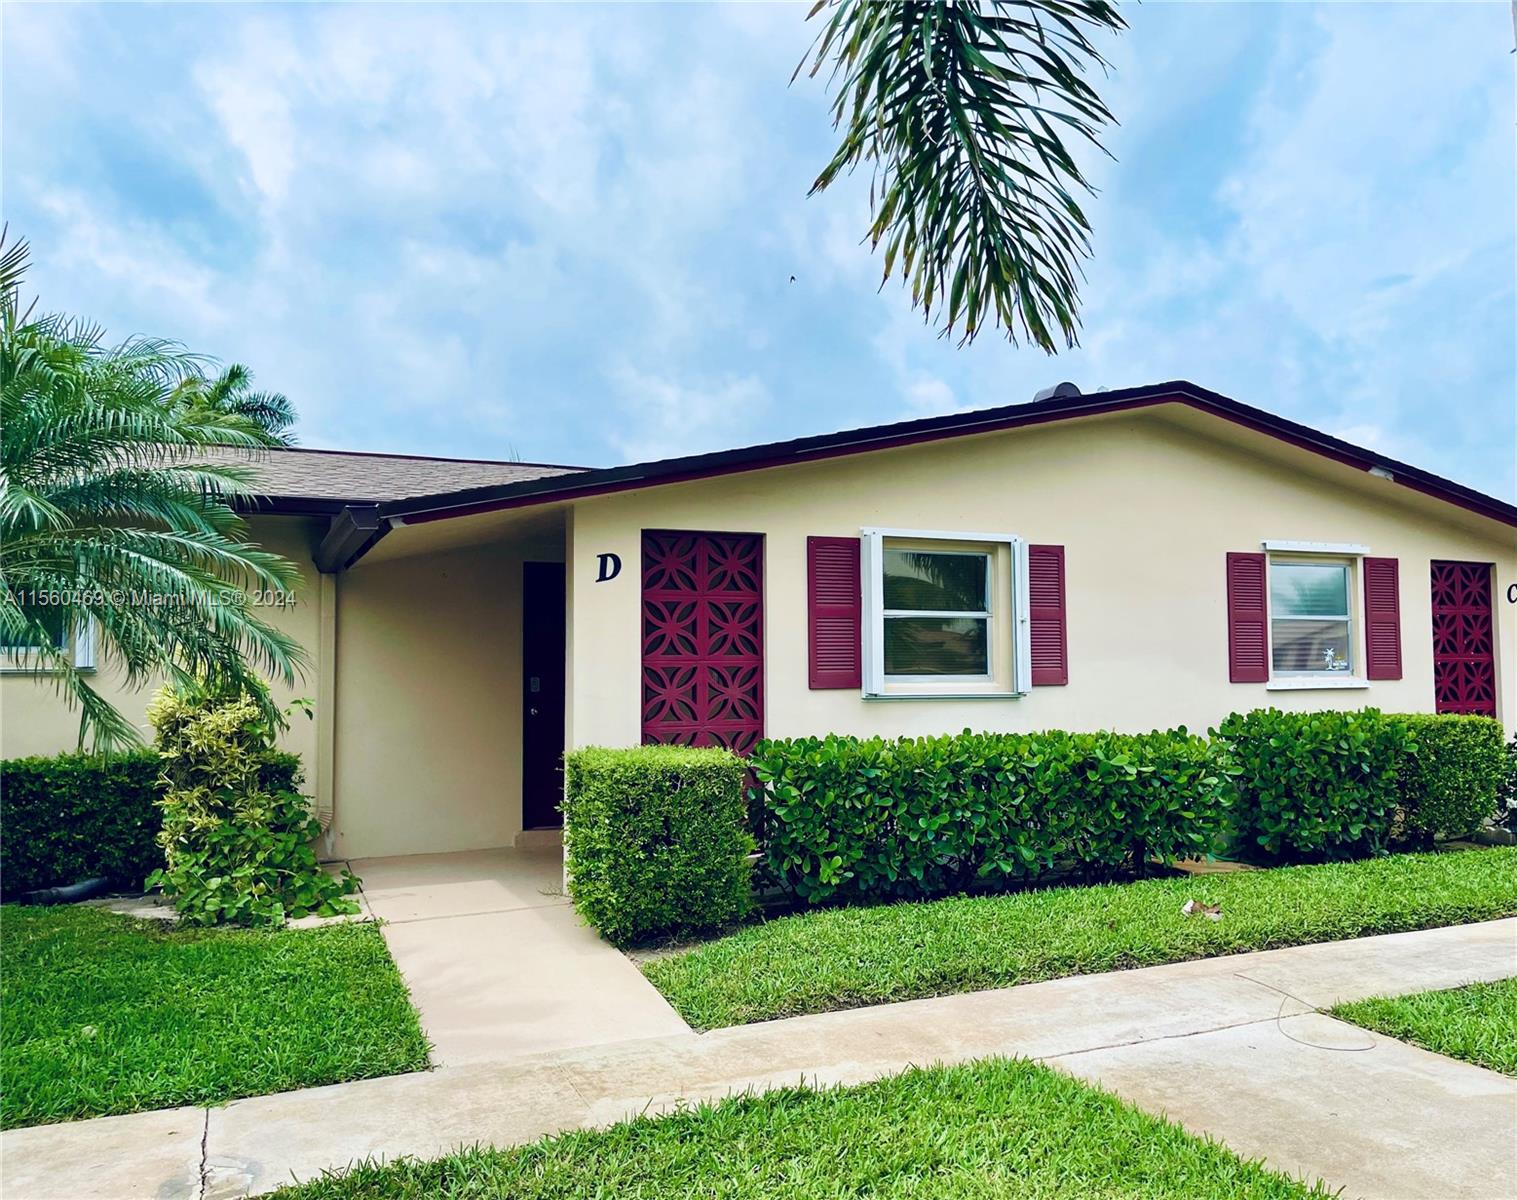 Property for Sale at 2960 Crosley Dr E Dr D, West Palm Beach, Palm Beach County, Florida - Bedrooms: 1 
Bathrooms: 1  - $114,000